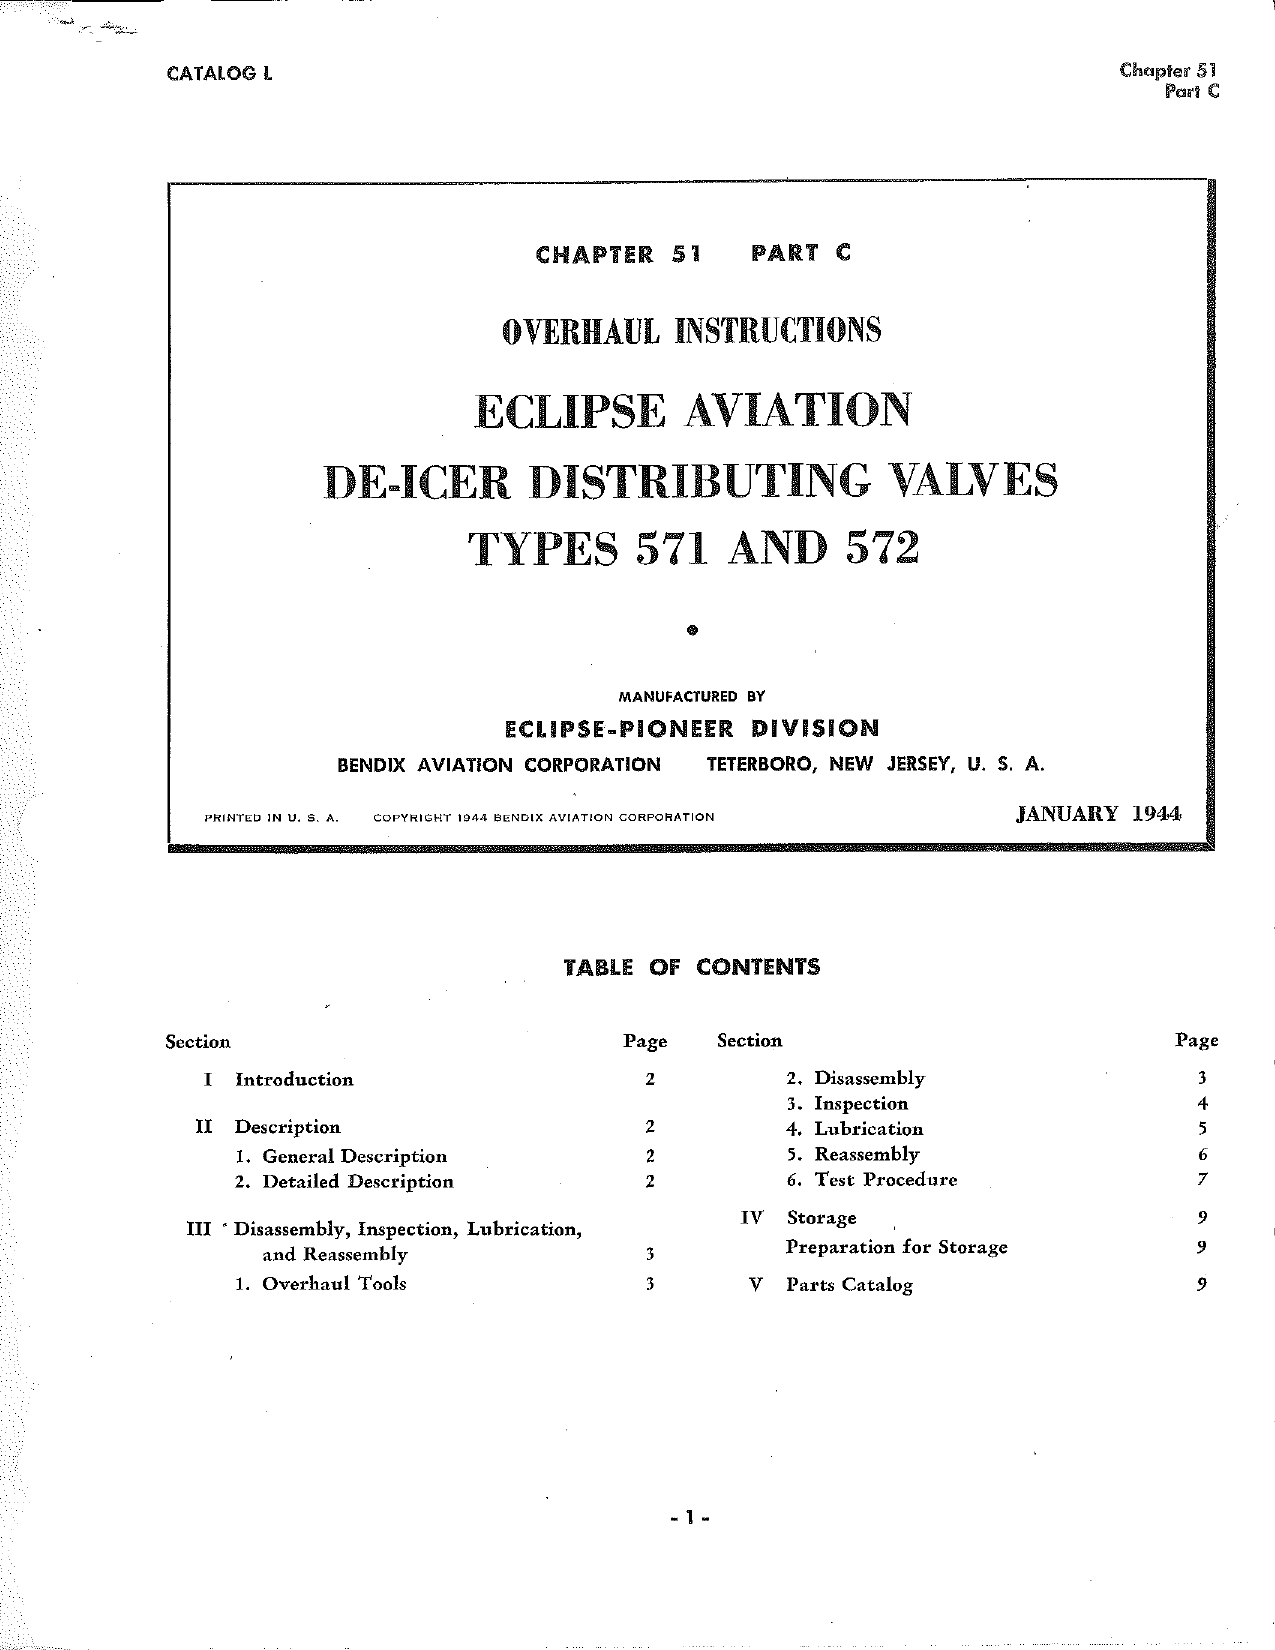 Sample page 1 from AirCorps Library document: Overhaul Instructions for De-Icer Distributing Valves - Types 571 and 572